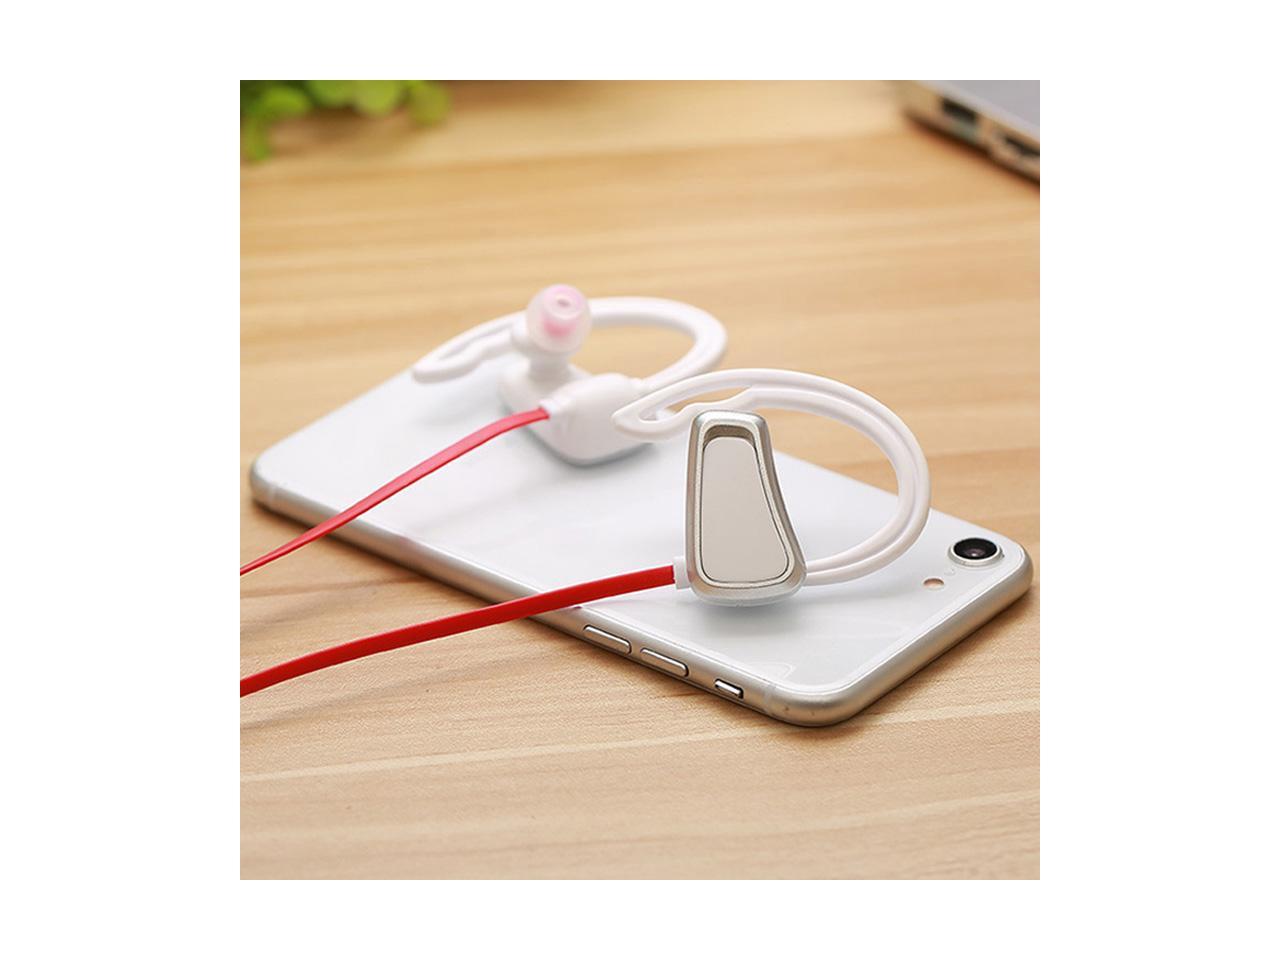 Bluetooth Earphone B04 Wireless Bluetooth Headset Over the Ear Stereo Motion Headphones with Color Box For IOS Android